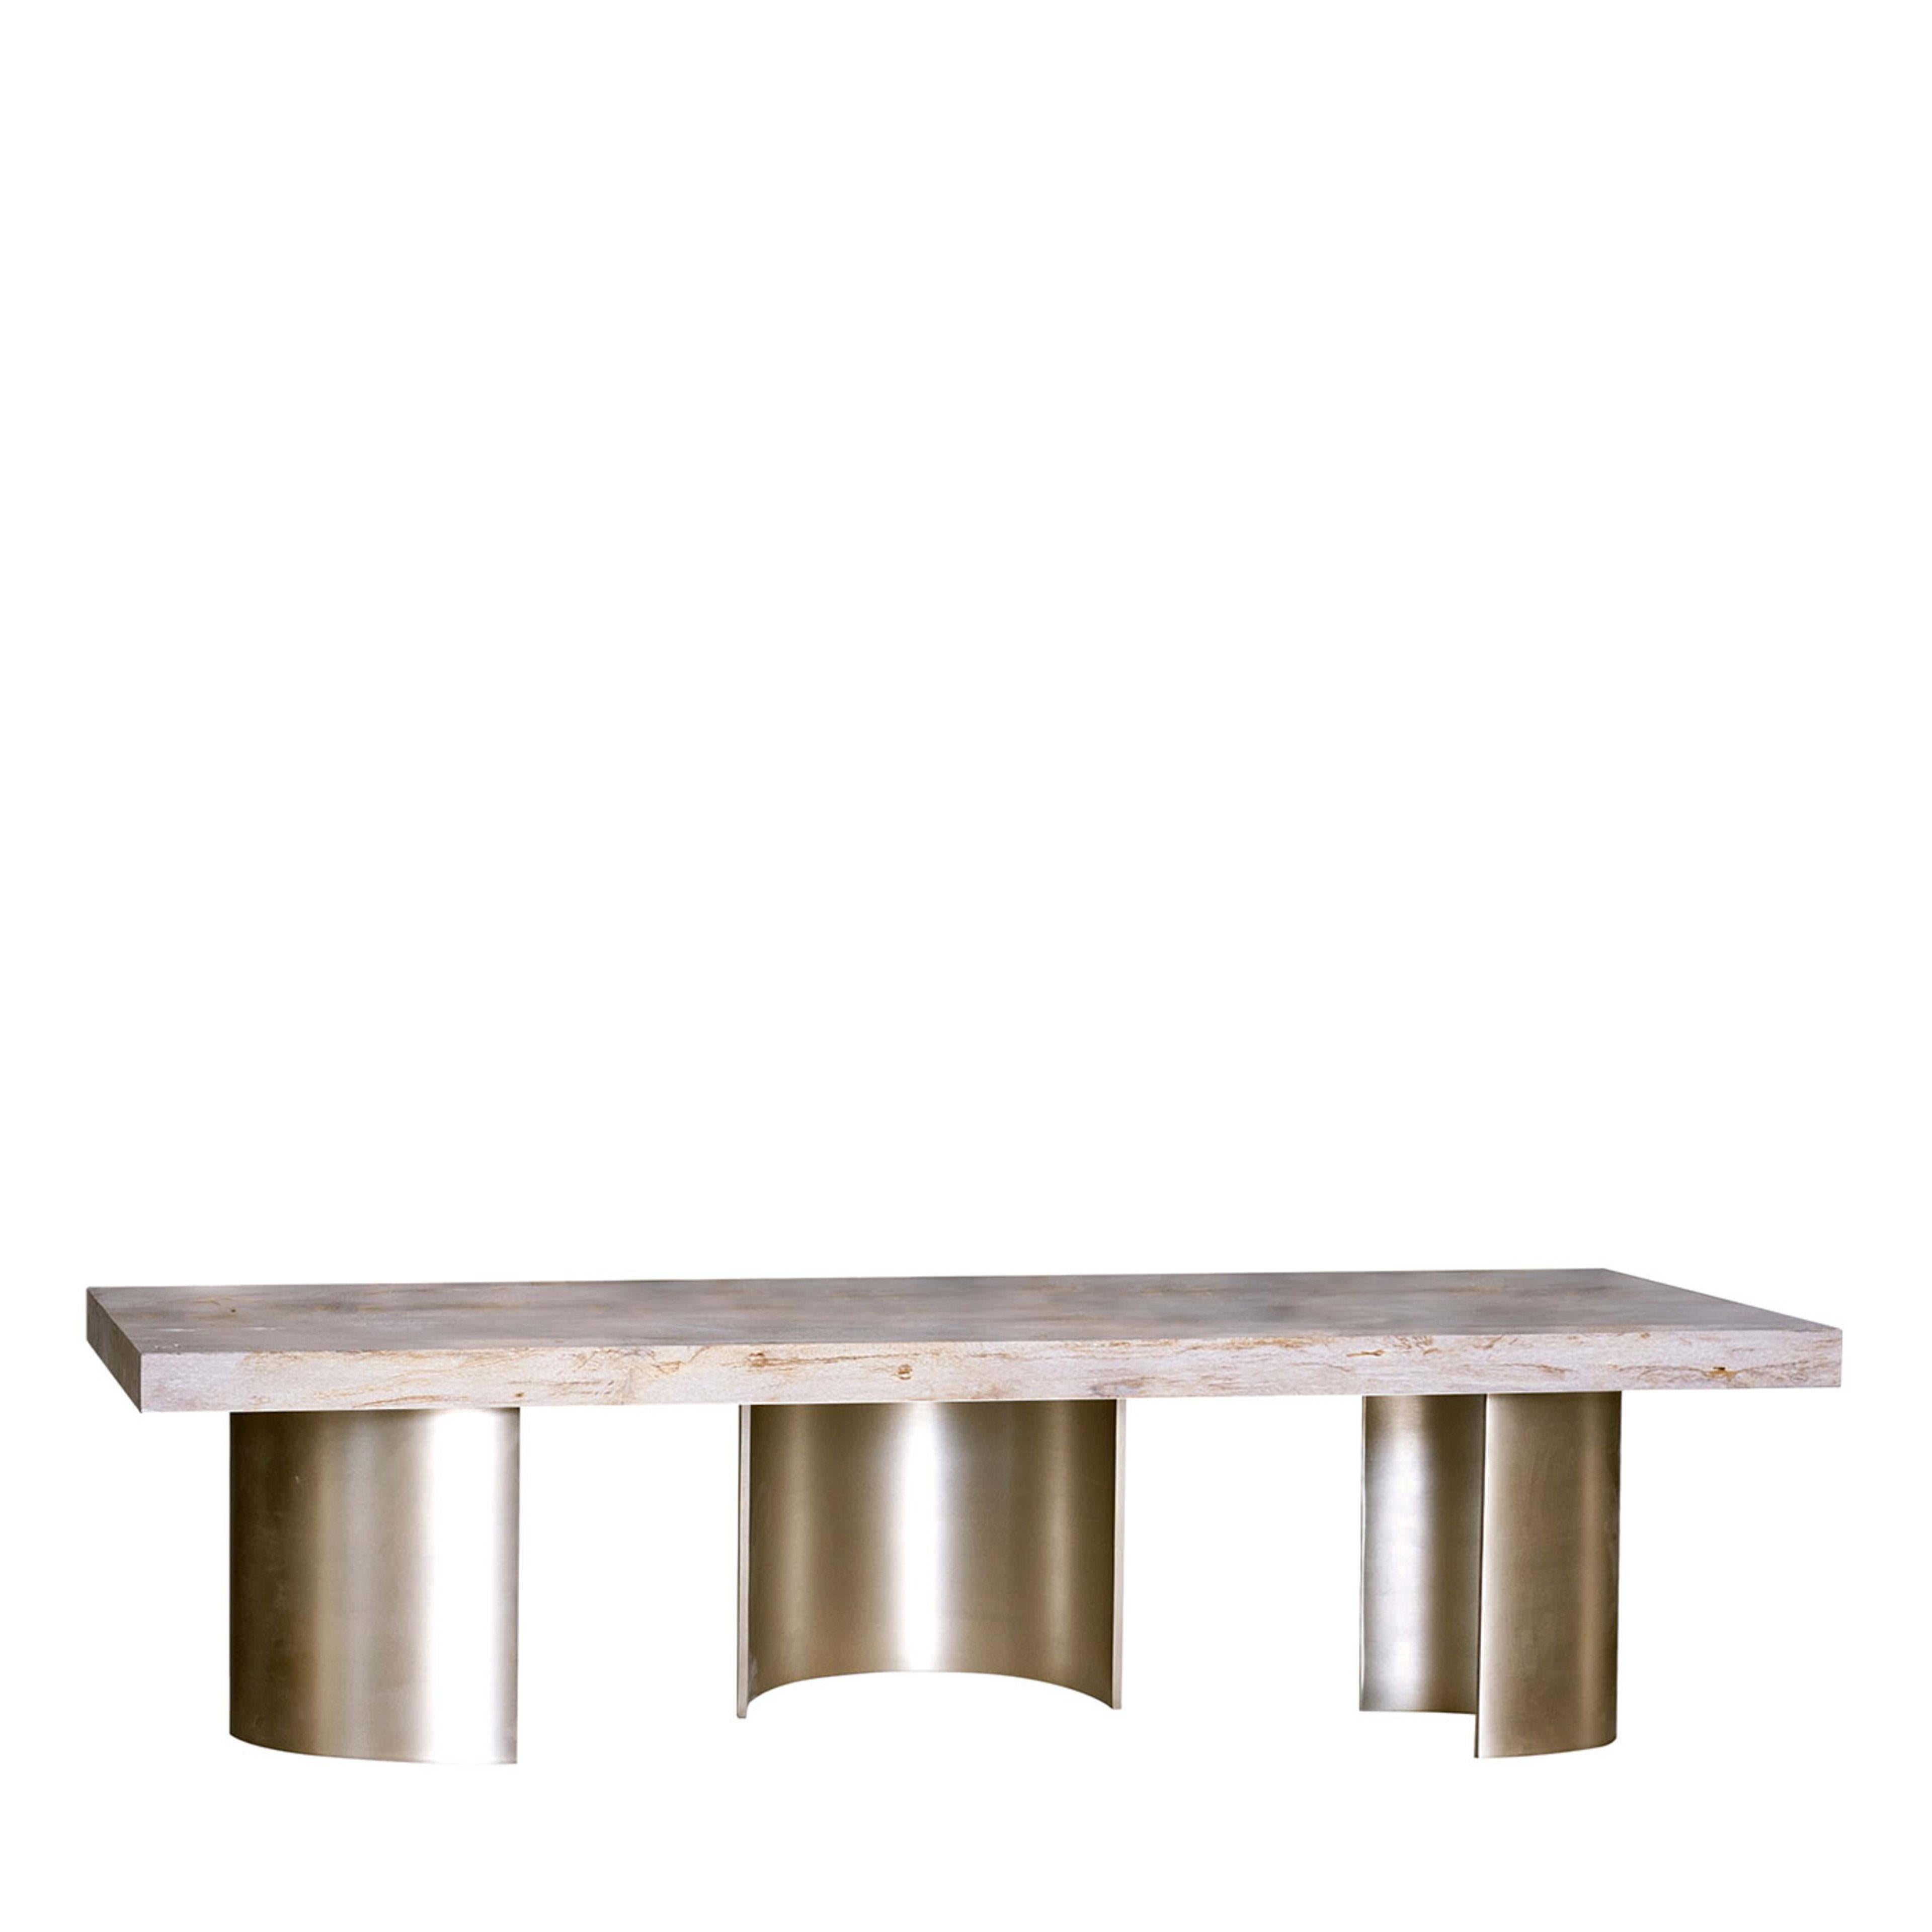 The trunk’s part identified as a “book” inspired the design of this coffee table. Slabs of petrified wood rest on curved metal surfaces. These semicircles are oriented at different angles, creating movement and dynamism in harmonious contrast with